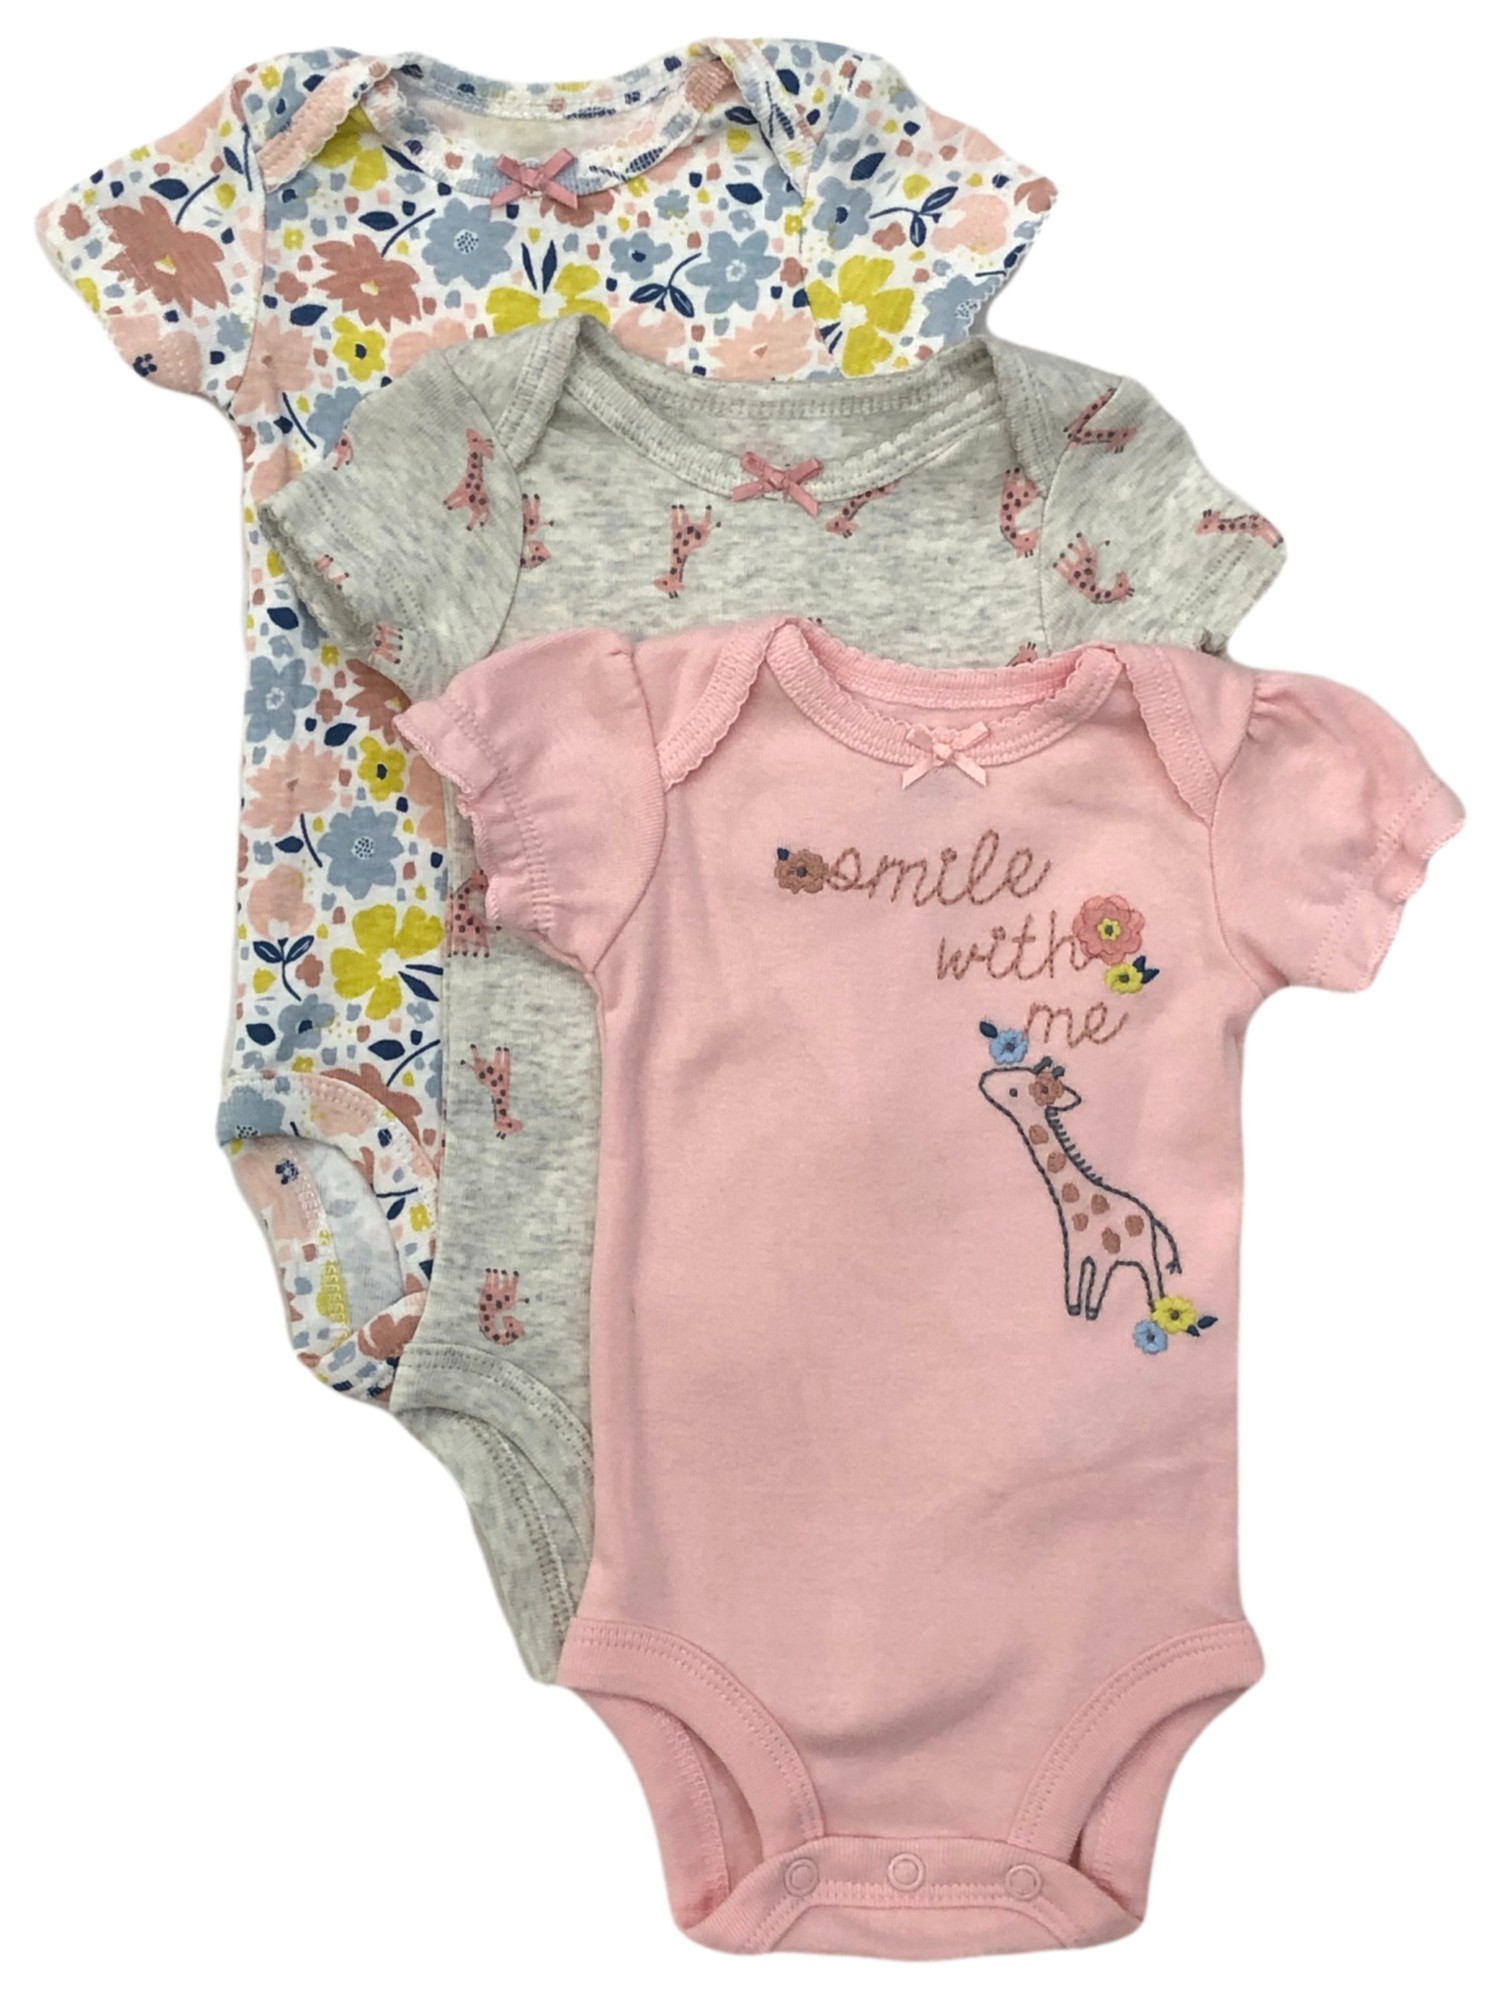 Carter's Carters Infant Girls 3pc Bodysuits Set Pink Giraffe Smile Baby Outfit